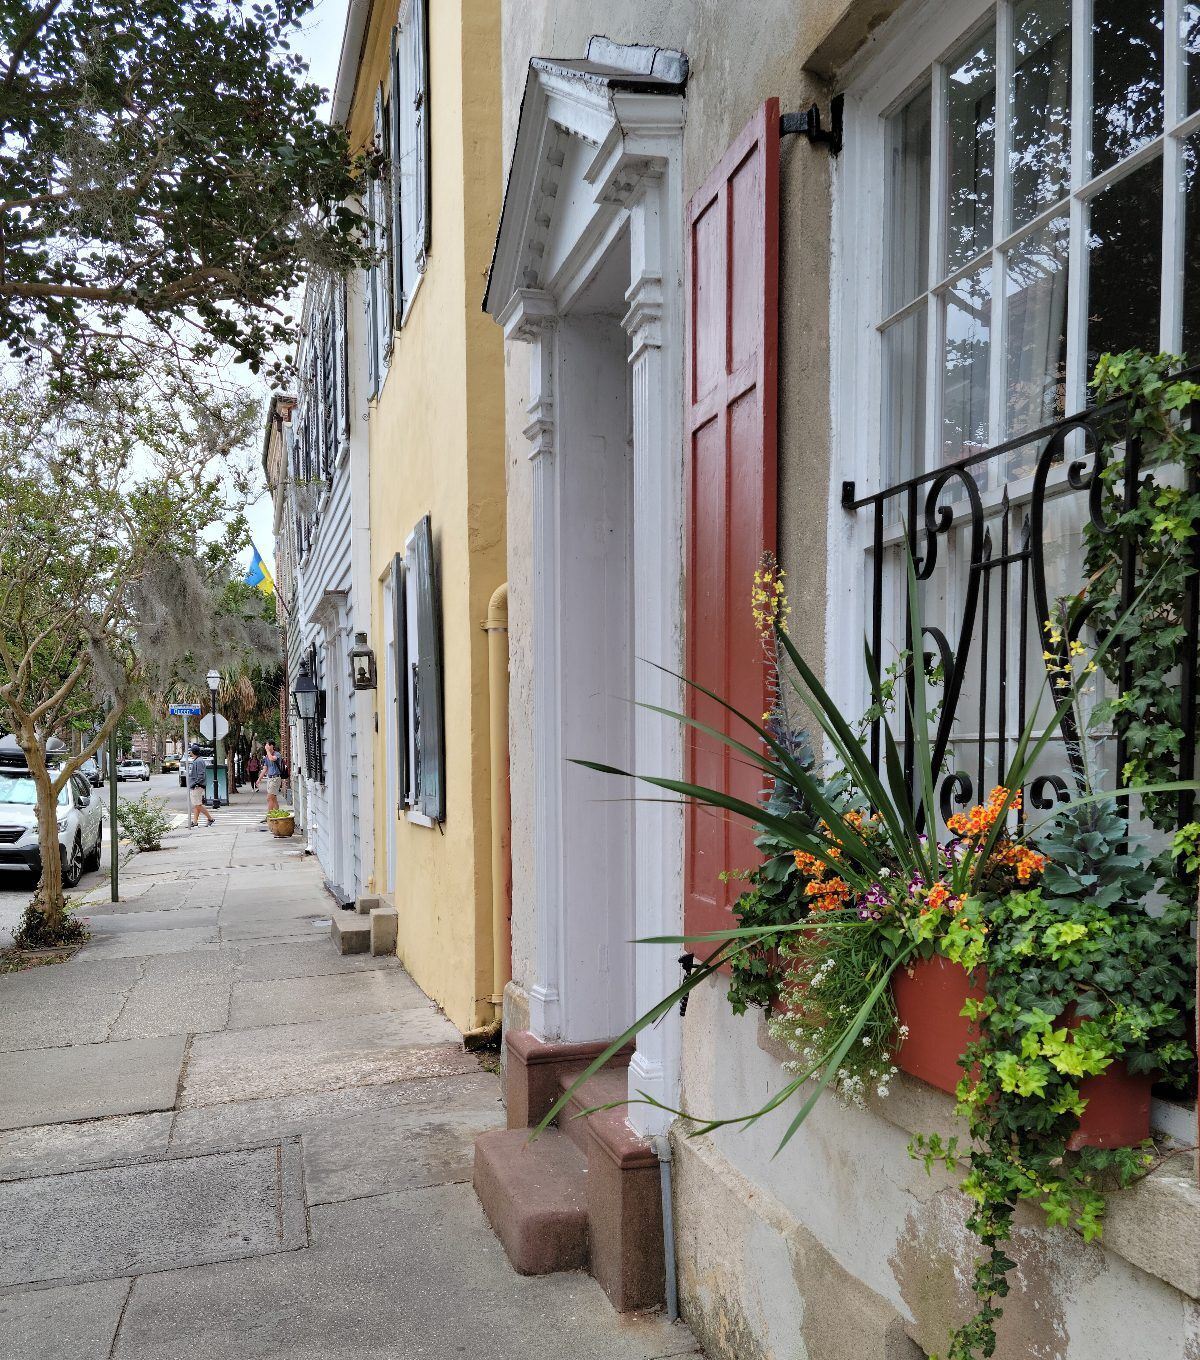 Charleston's downtown: rows of pastel-colored homes showcasing the city's historic charm and vibrant character.